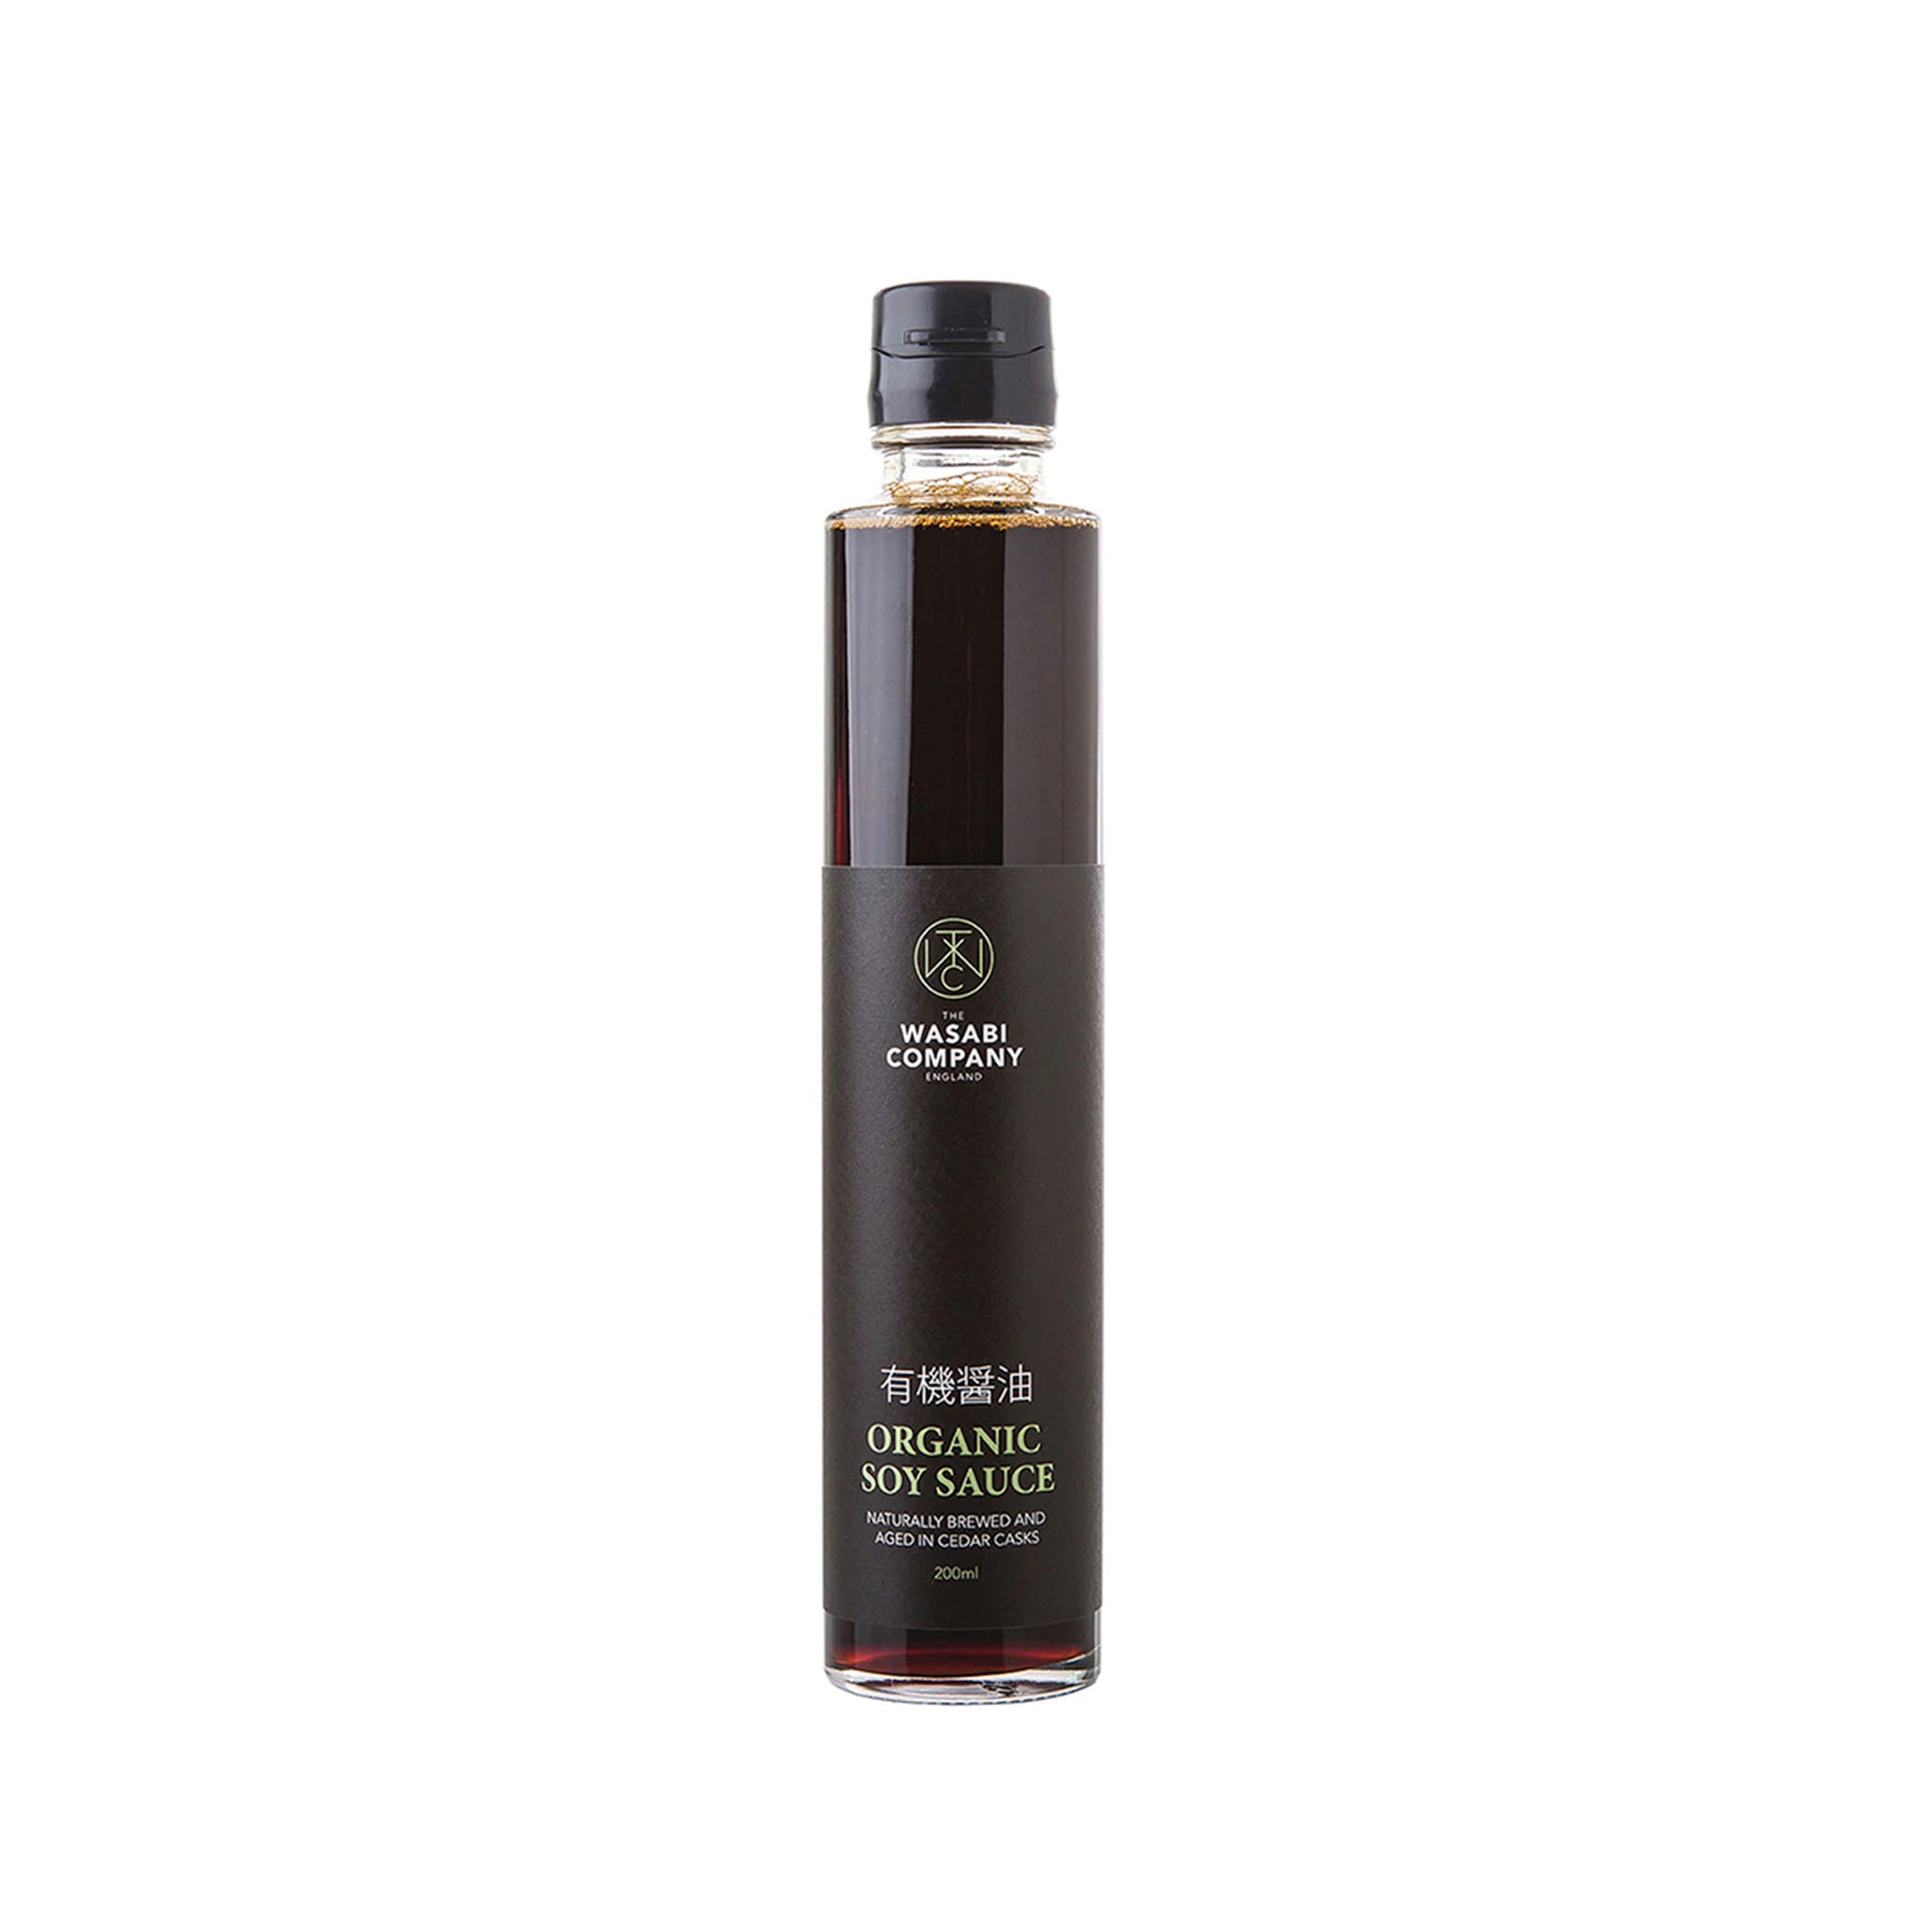 This all-natural soy sauce pairs with sushi and sashimi and can also be used as a seasoning for vegetables and meats.